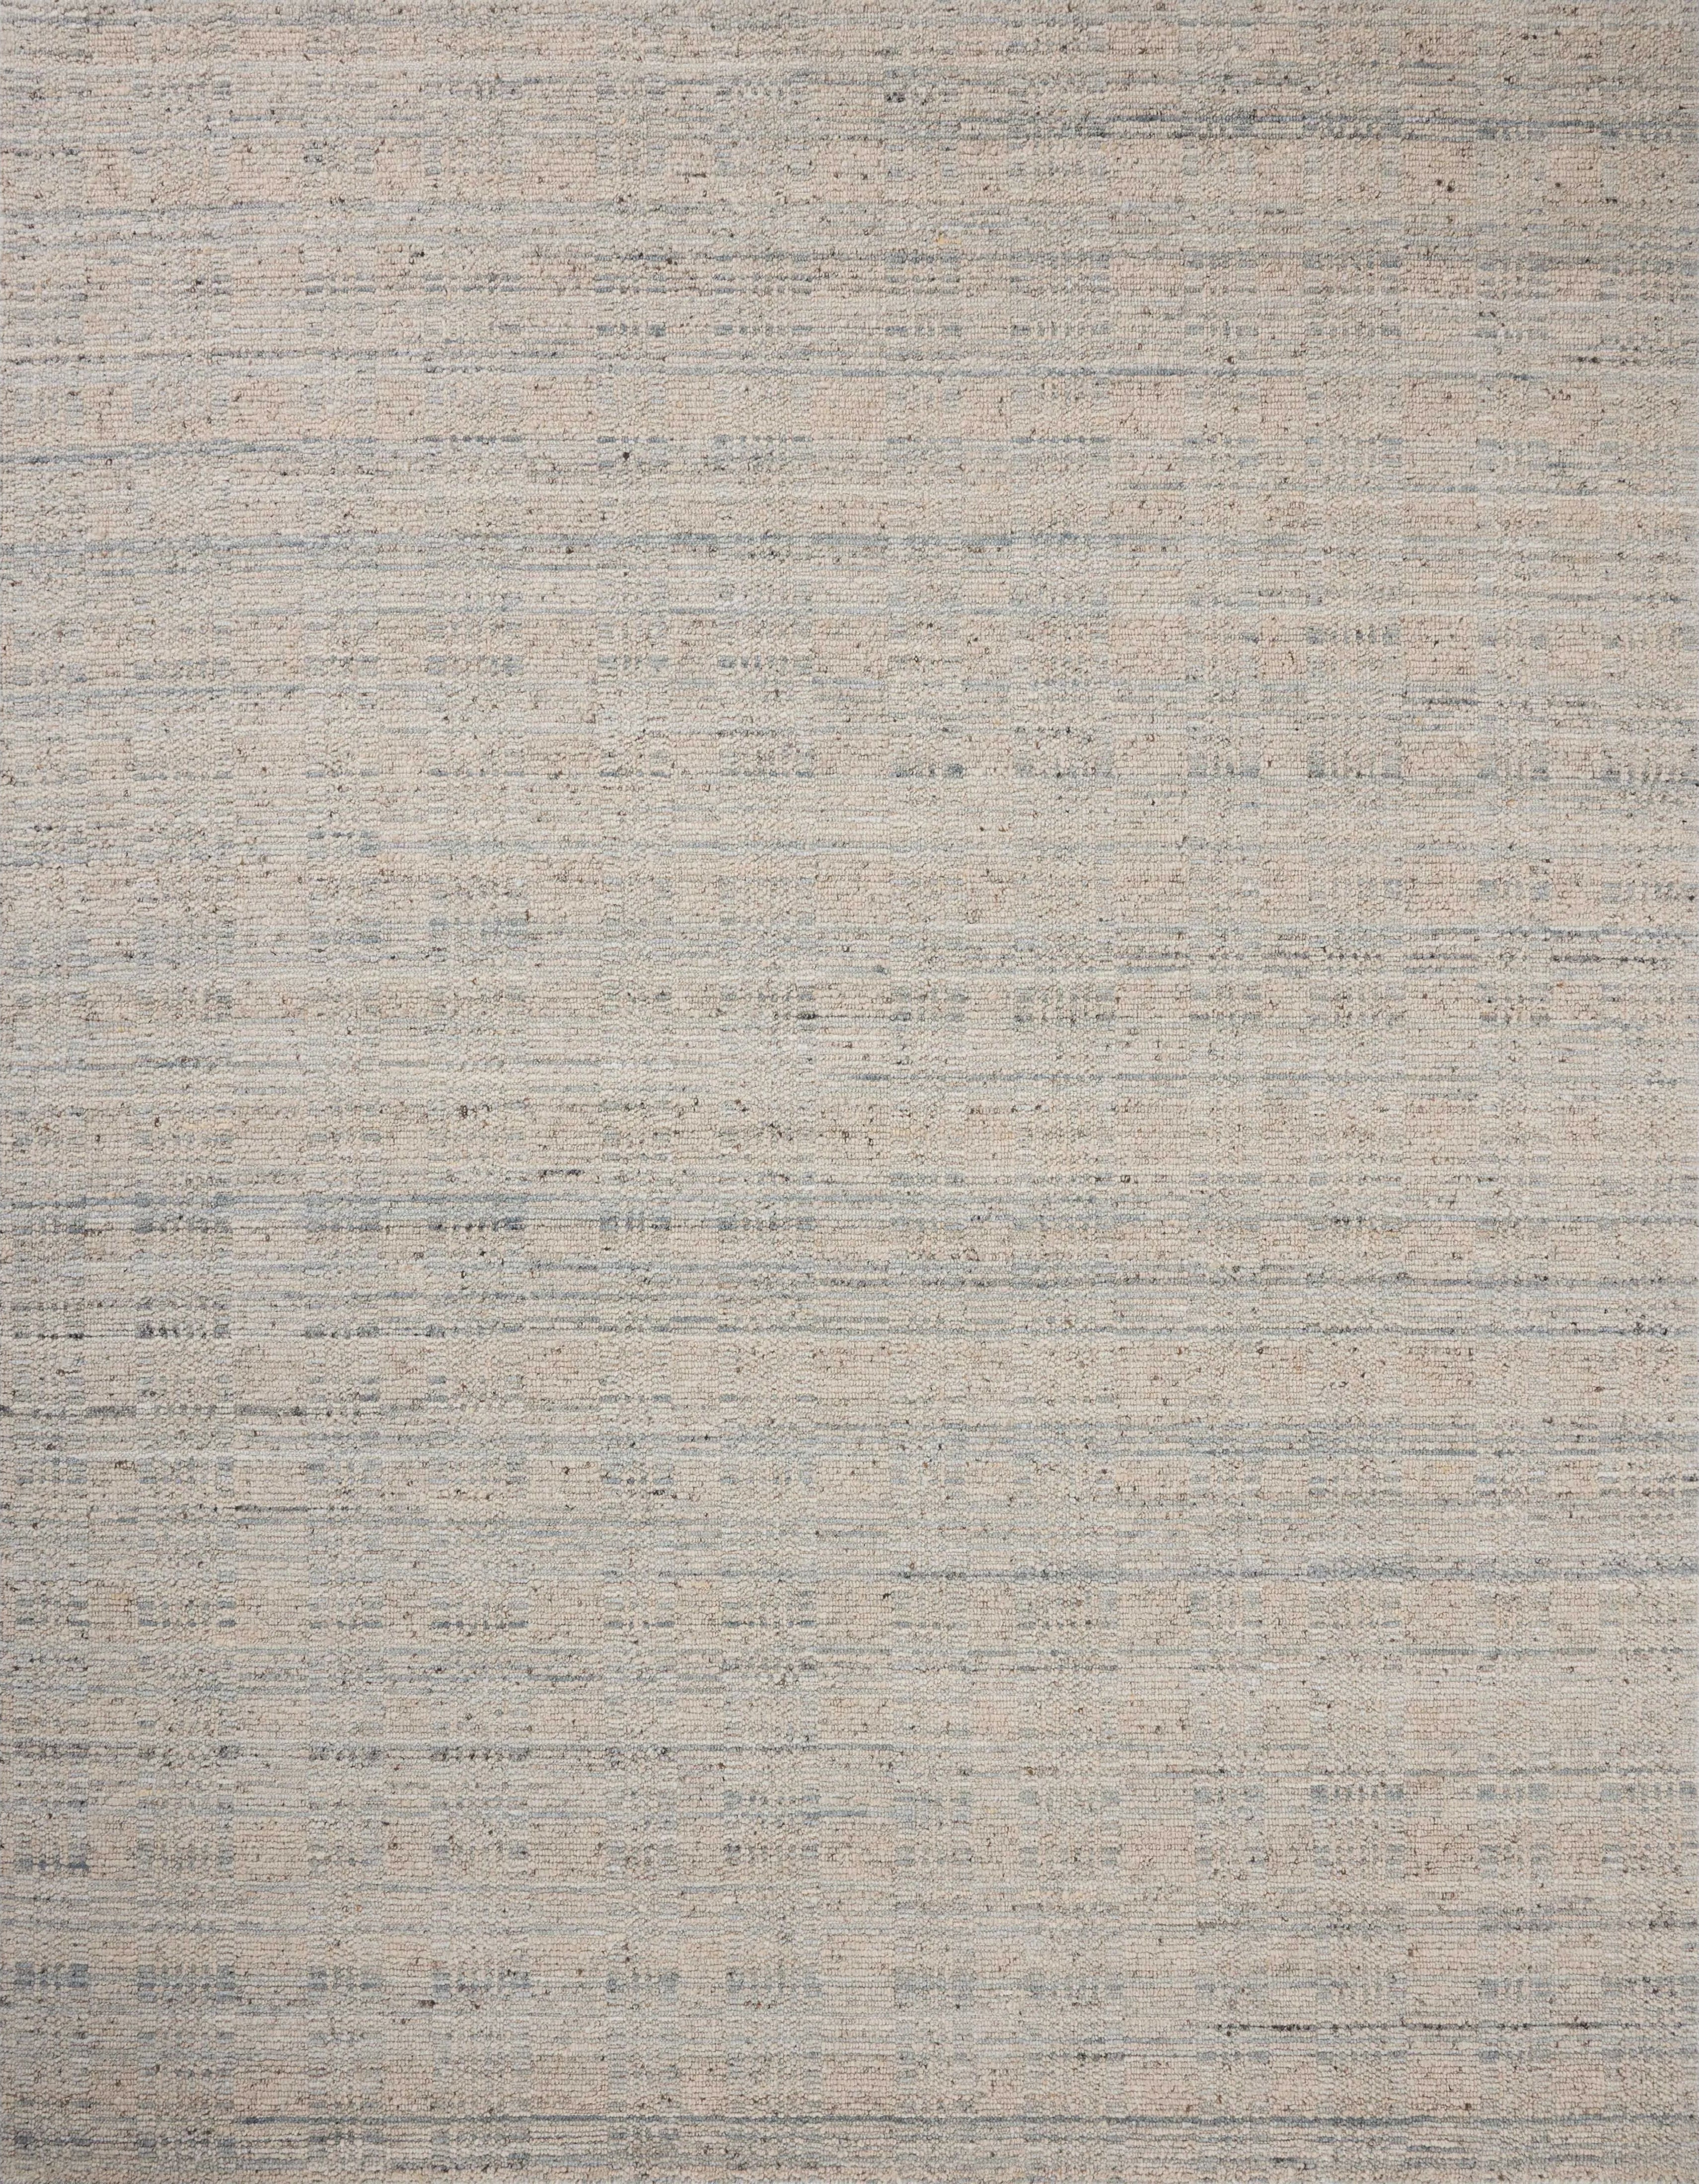 The Sonya Mist / Oatmeal Rug is a hand-loomed area rug with a light, airy palette and understated graphic design. The rug’s textural pile is a soft blend of wool and nylon that creates dimension in living rooms, bedrooms, and more. Amethyst Home provides interior design, new home construction design consulting, vintage area rugs, and lighting in the Monterey metro area.